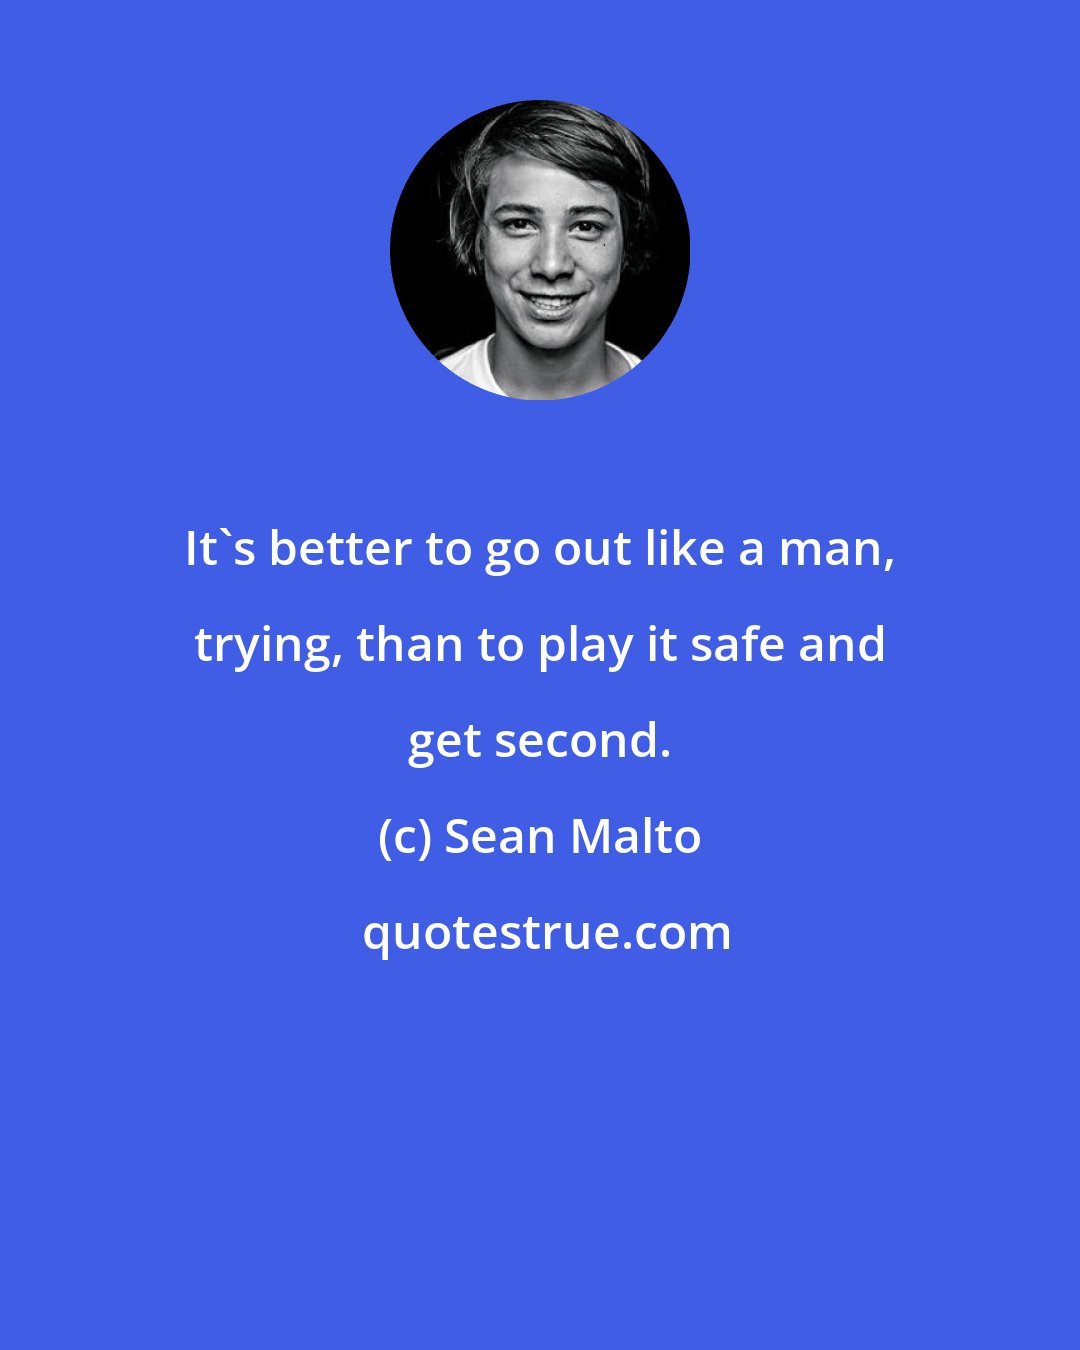 Sean Malto: It's better to go out like a man, trying, than to play it safe and get second.